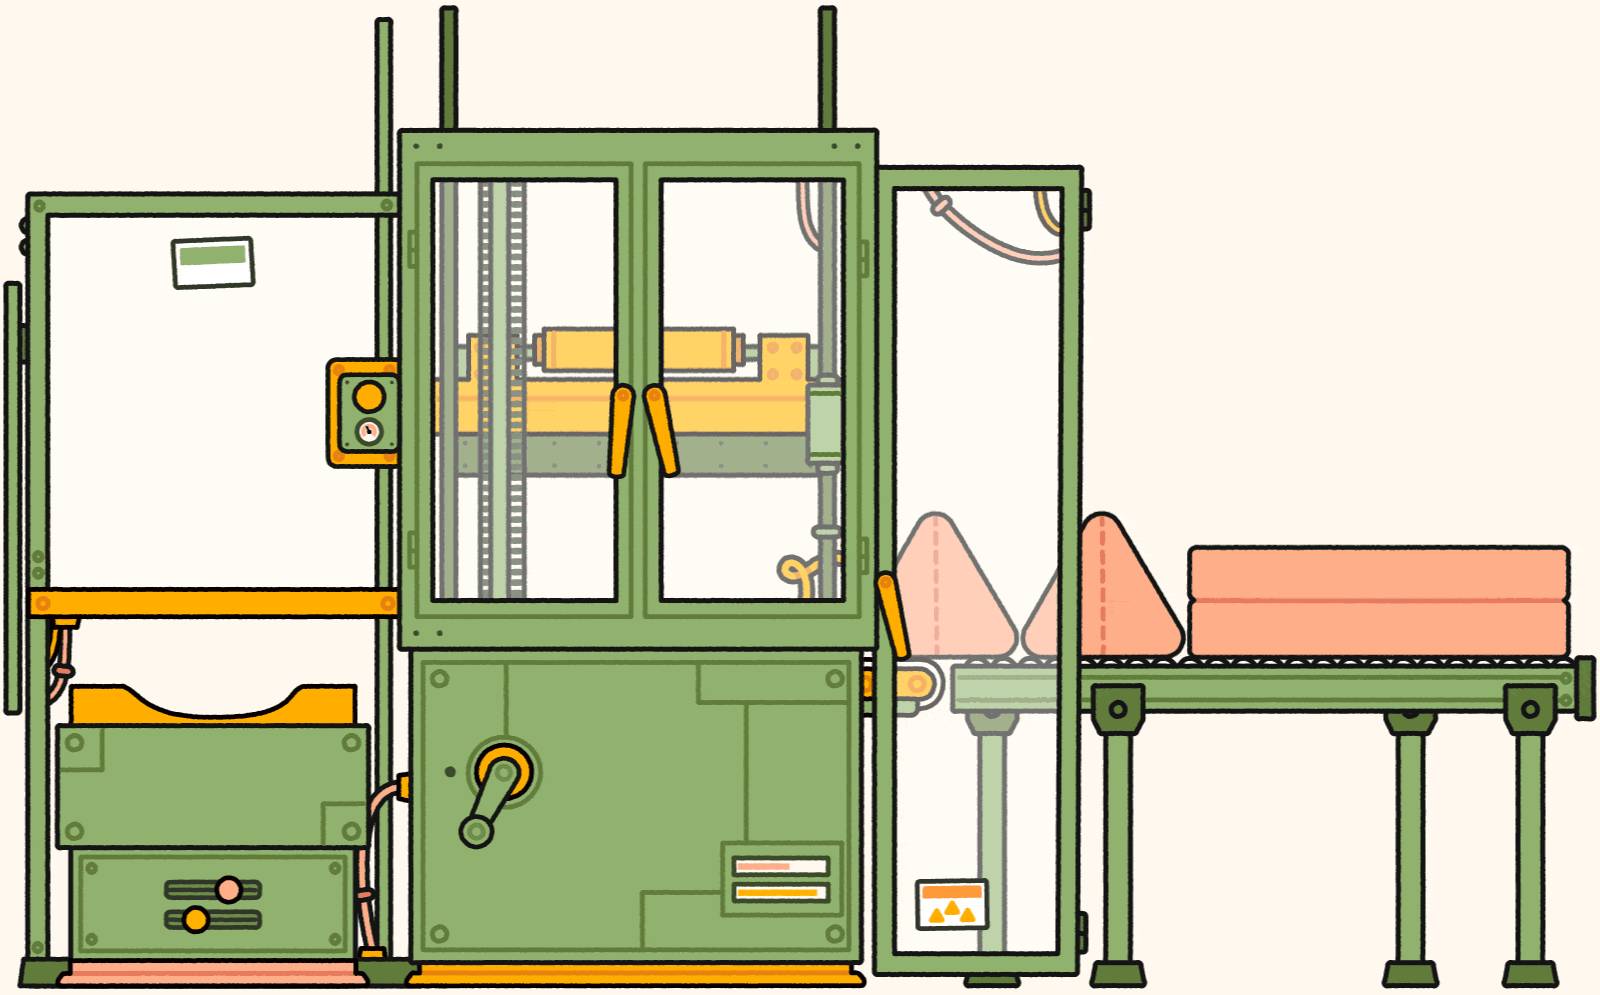 Animation of roll pack machine, called the Beluga, compressing and rolling up a Sweetpea-colored Nugget couch